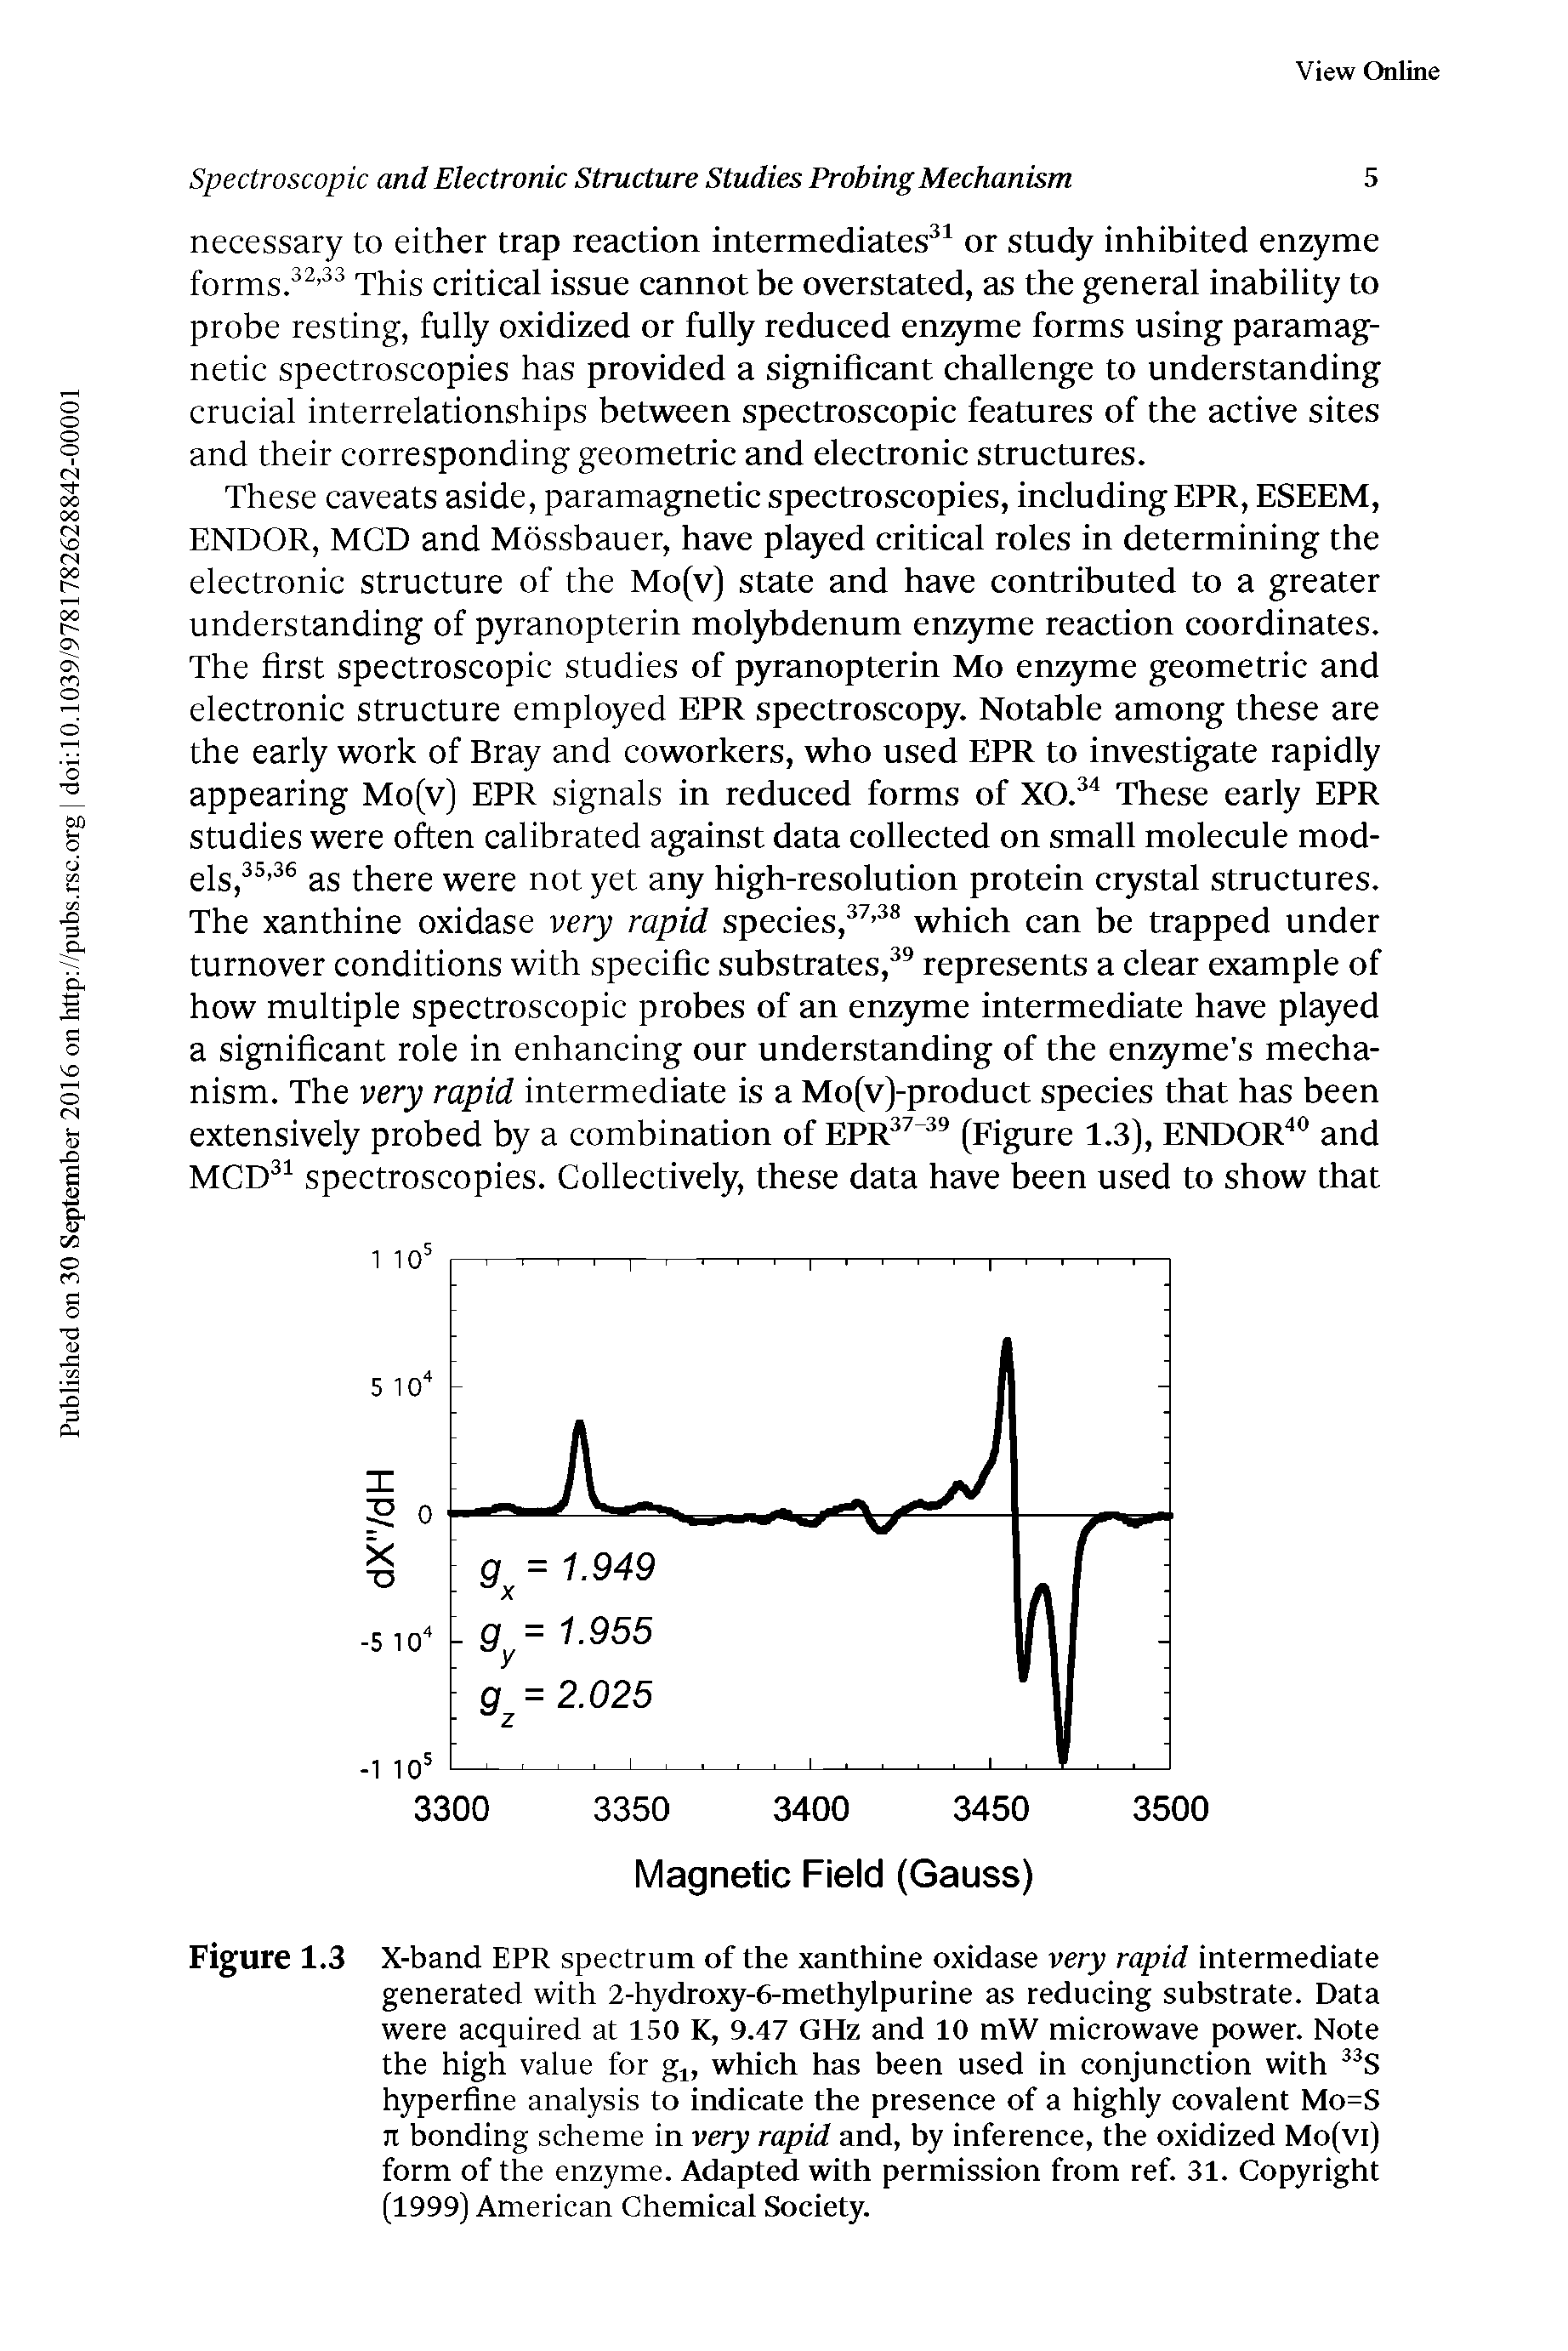 Figure 1.3 X-band EPR spectrum of the xanthine oxidase very rapid intermediate generated with 2-hydroxy-6-methylpurine as reducing substrate. Data were acquired at 150 K, 9.47 GHz and 10 mW microwave power. Note the high value for g, which has been used in conjunction with S hyperfine analysis to indicate the presence of a highly covalent Mo=S n bonding scheme in very rapid and, by inference, the oxidized Mo(vi) form of the enzyme. Adapted with permission from ref. 31. Copyright (1999) American Chemical Society.